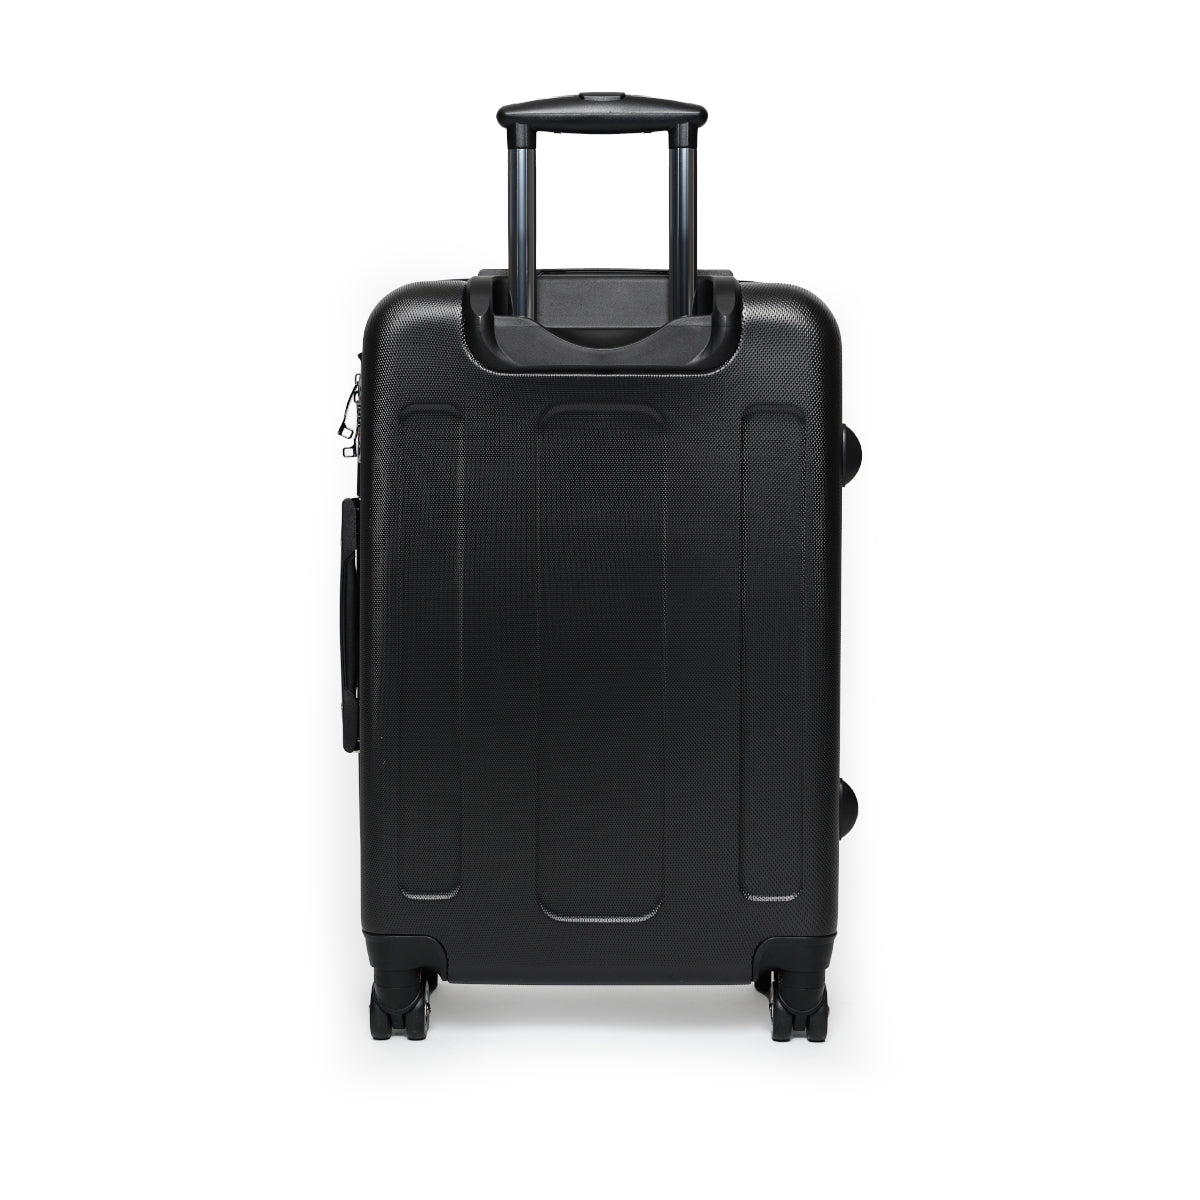 Getrott Nirvana Nevermind 1991 Black Cabin Suitcase Inner Pockets Extended Storage Adjustable Telescopic Handle Inner Pockets Double wheeled Polycarbonate Hard-shell Built-in Lock